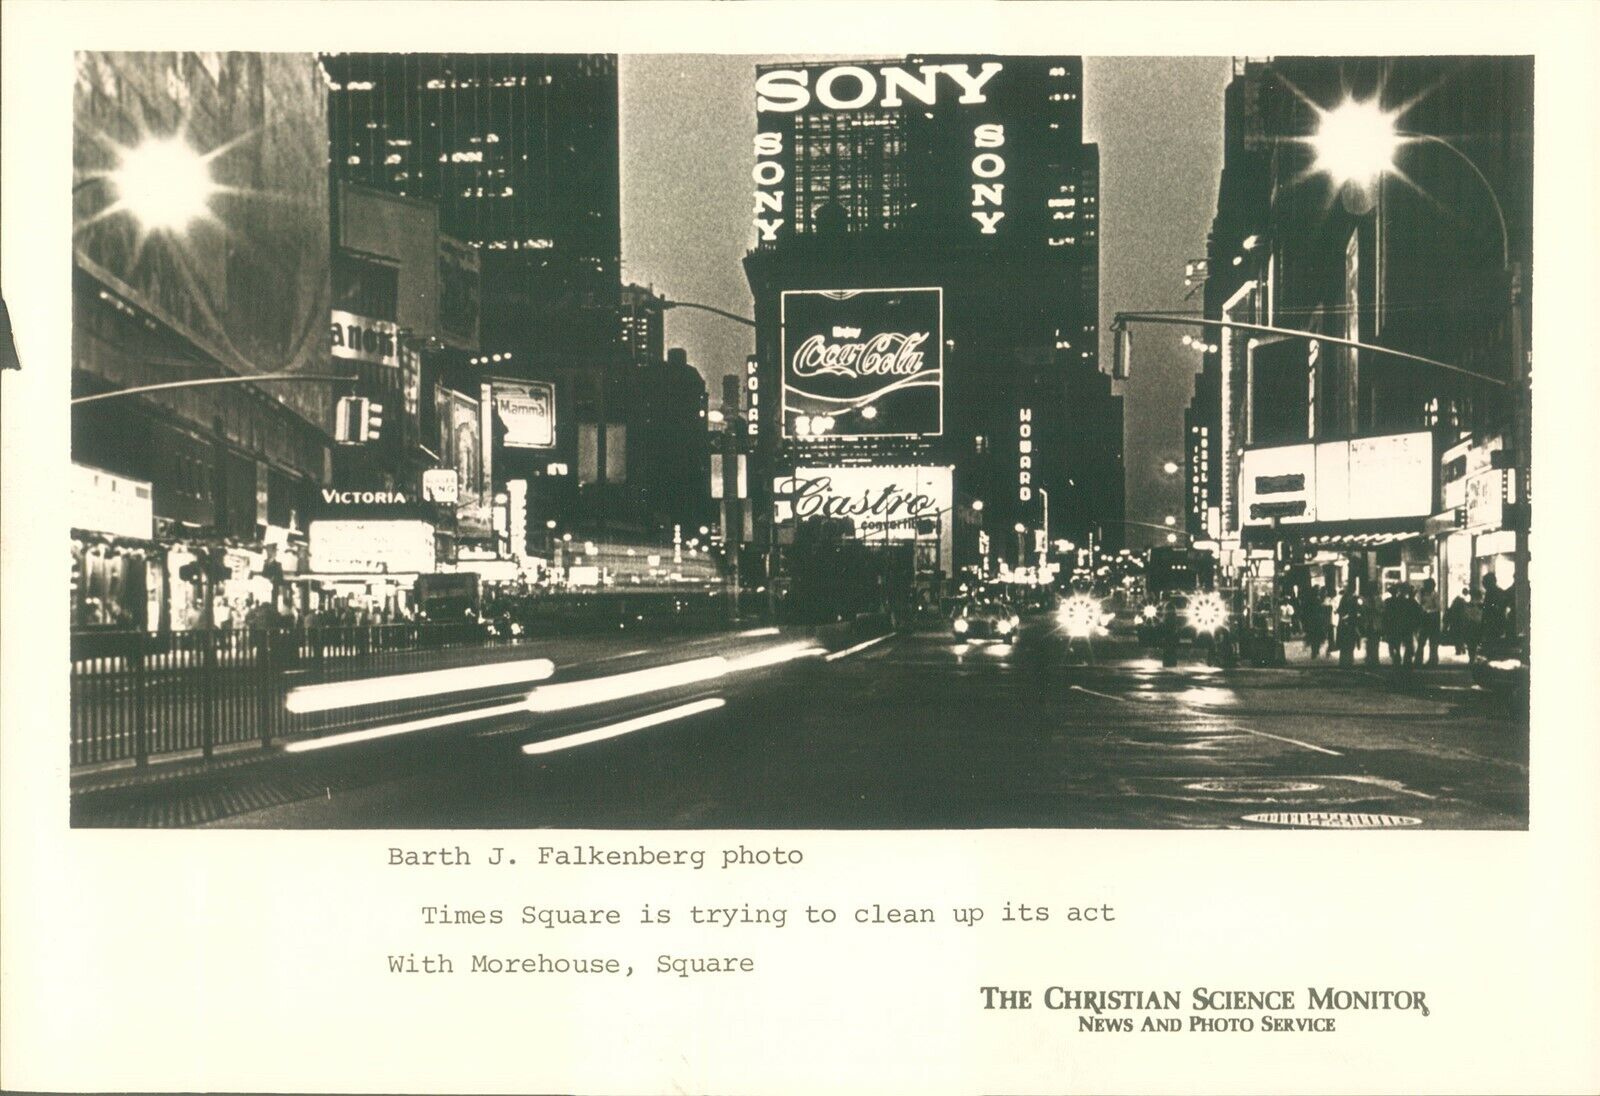 LG892 1979 Barth Falkenberg Wire Photo NEW YORK TIMES SQUARE Clean Up Its Act